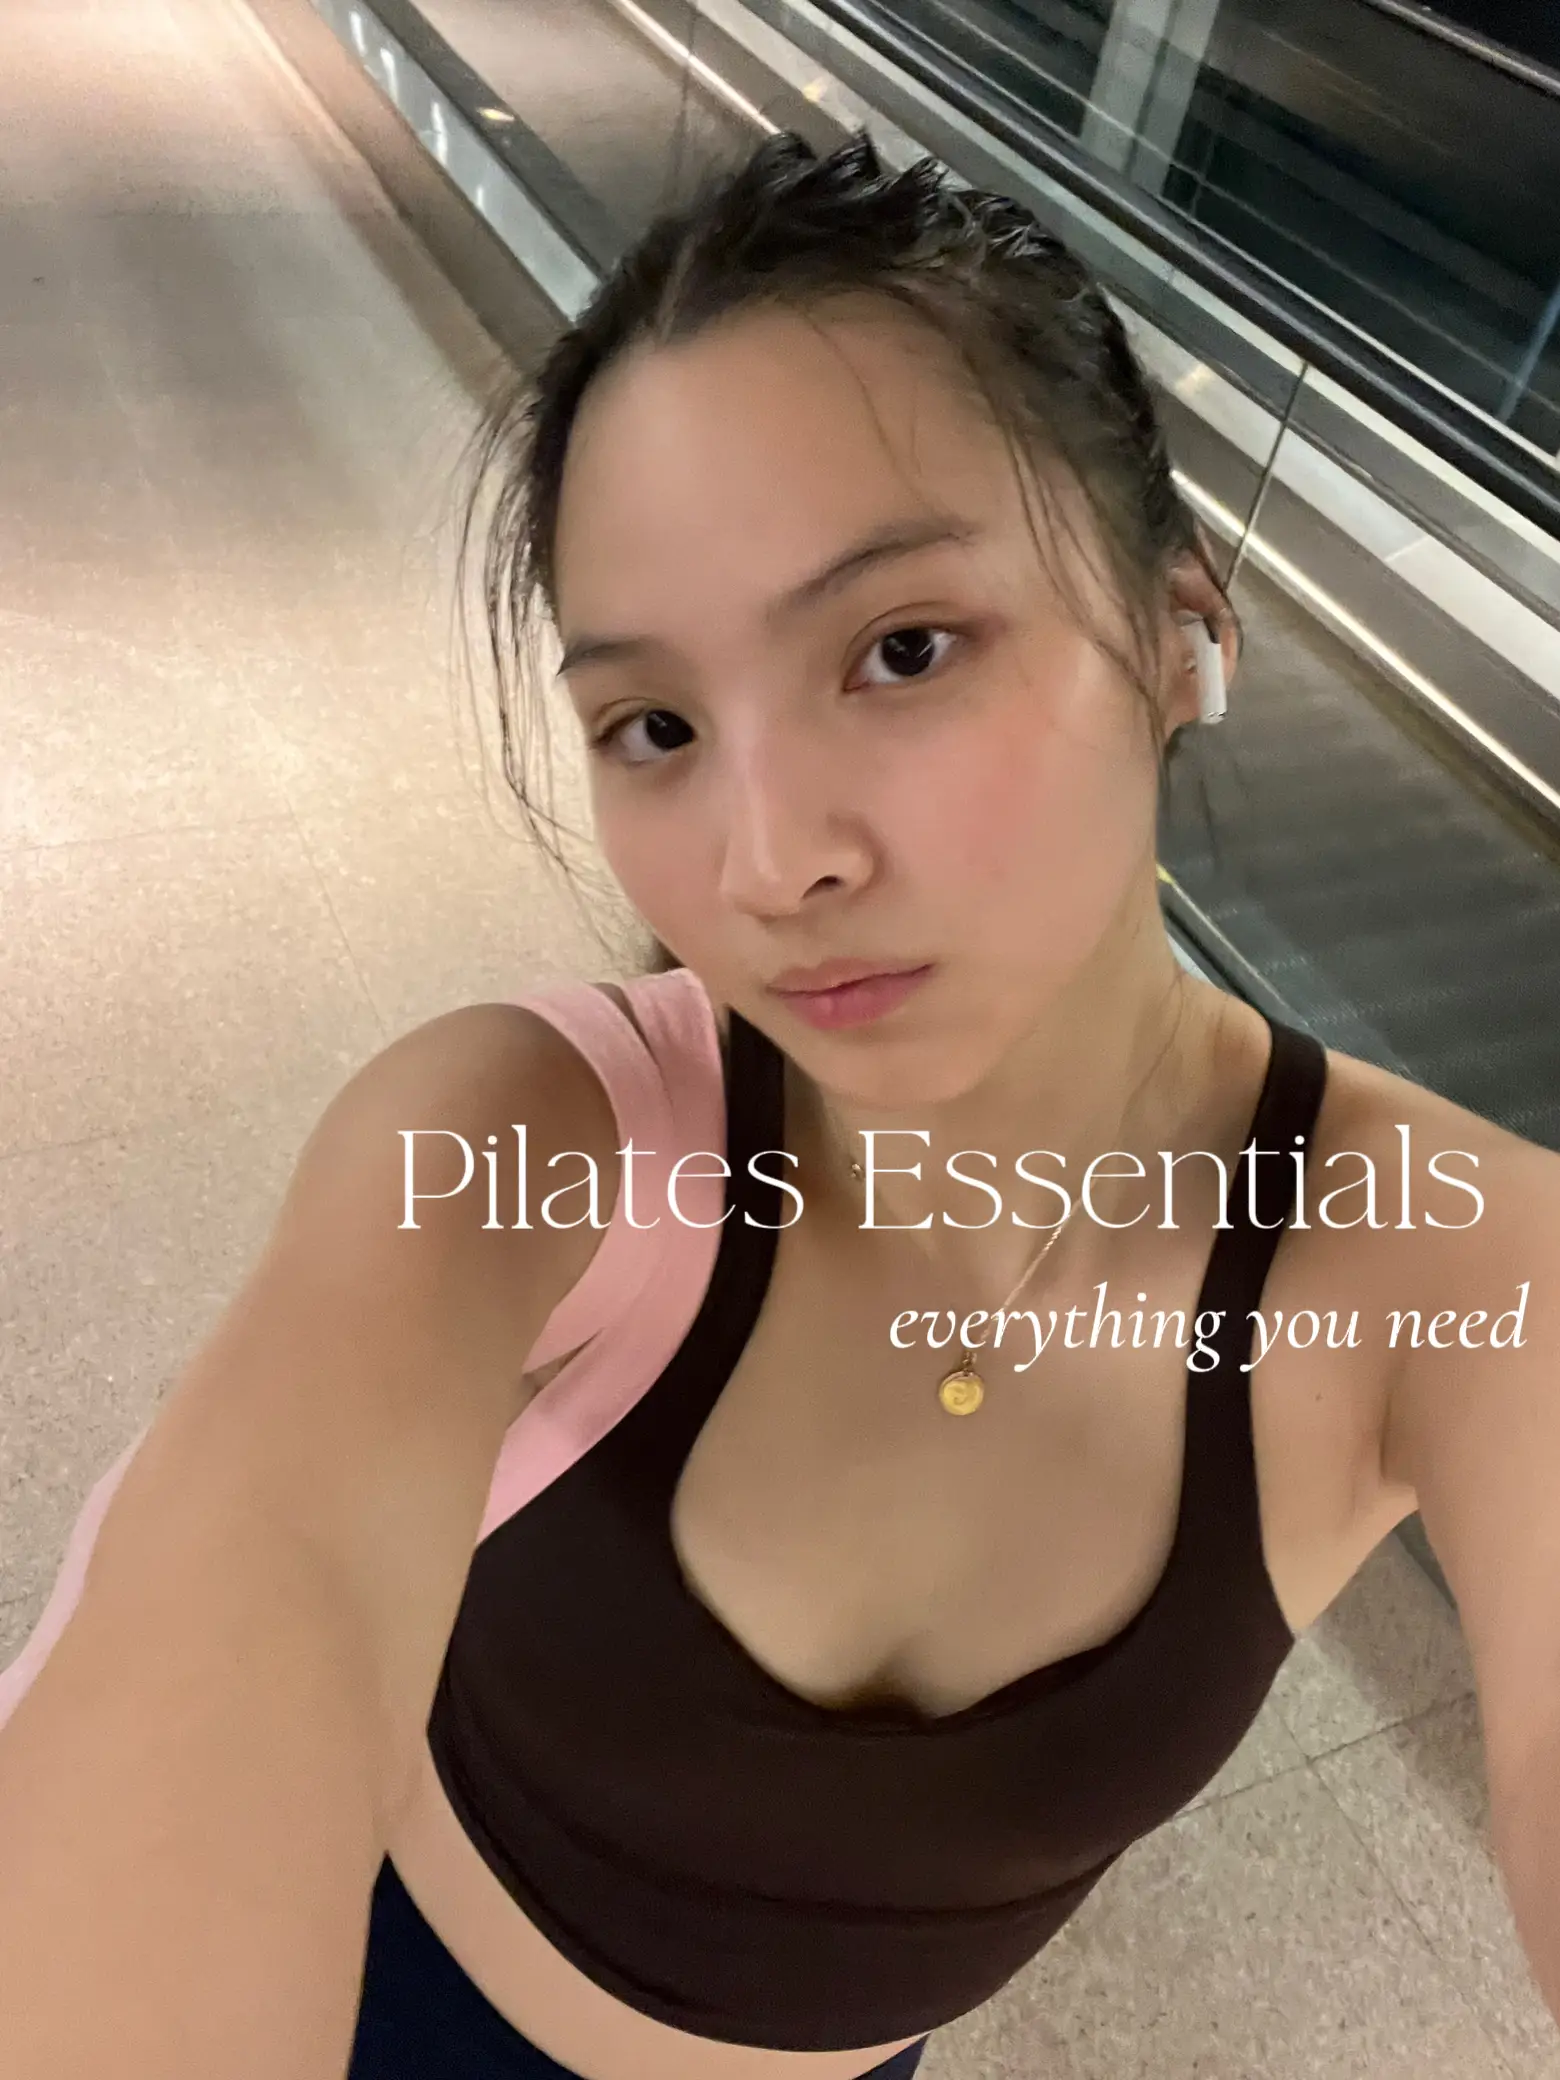 Pilates princess essentials- everything u need 💋🩰, Gallery posted by  gisele rei!